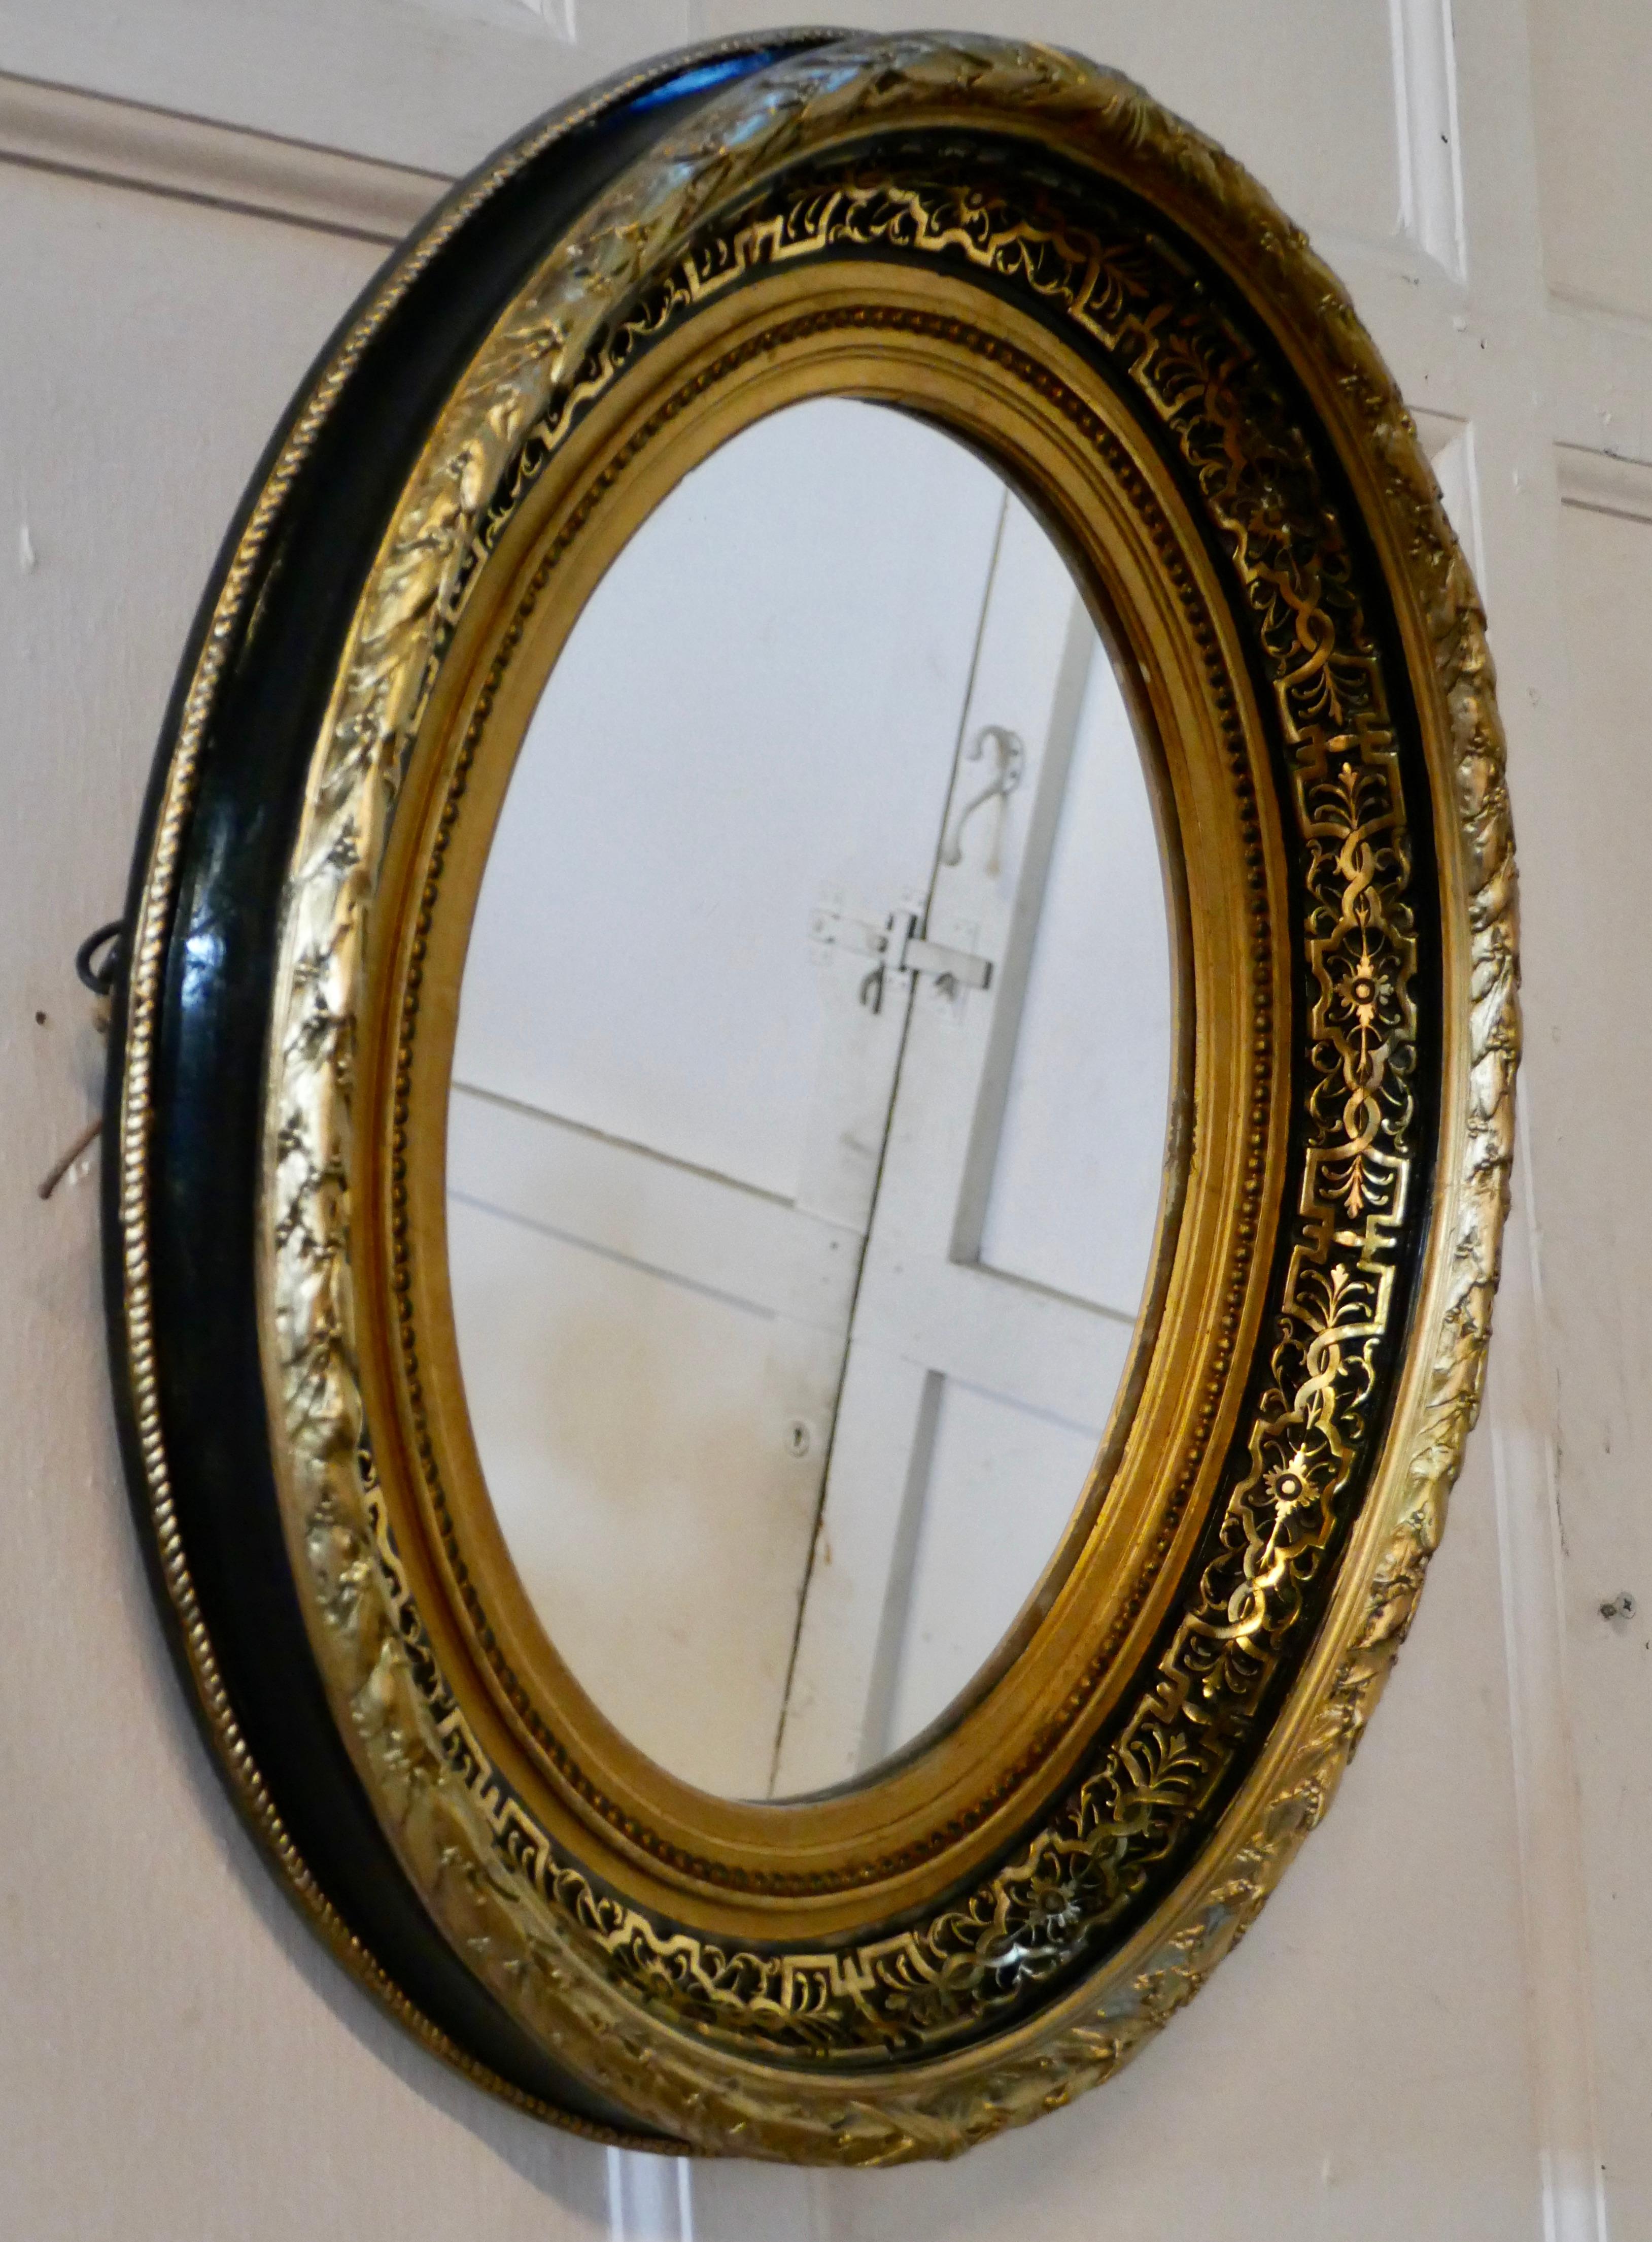 Superb deep oval frame French Empire gilt and lacquer wall mirror

This is a stunning French Empire gilt and lacquer wall mirror
The 4” oval frame is profusely decorated in black lacquer, gold gesso and gold leaf
This is a very lovely piece and